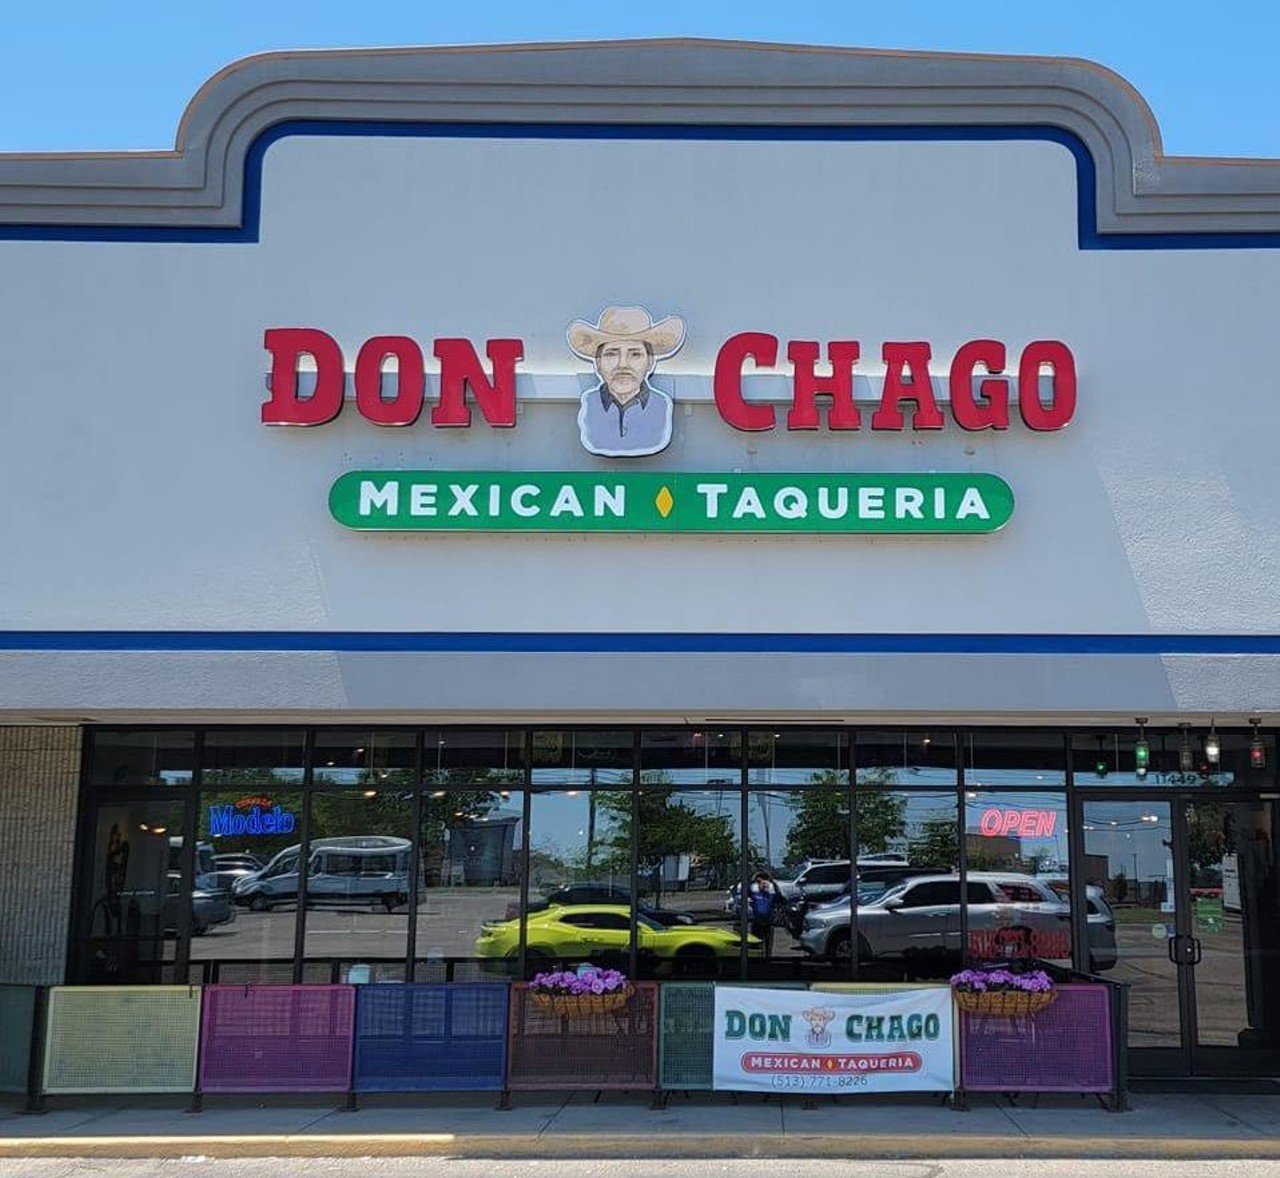 No. 8: Taqueria Don Chago
11449 Princeton Pike, Springdale
“Do yourself a favor and order a torta! A big as your head and delicious! I would definitely come back for more!” -Angela C.